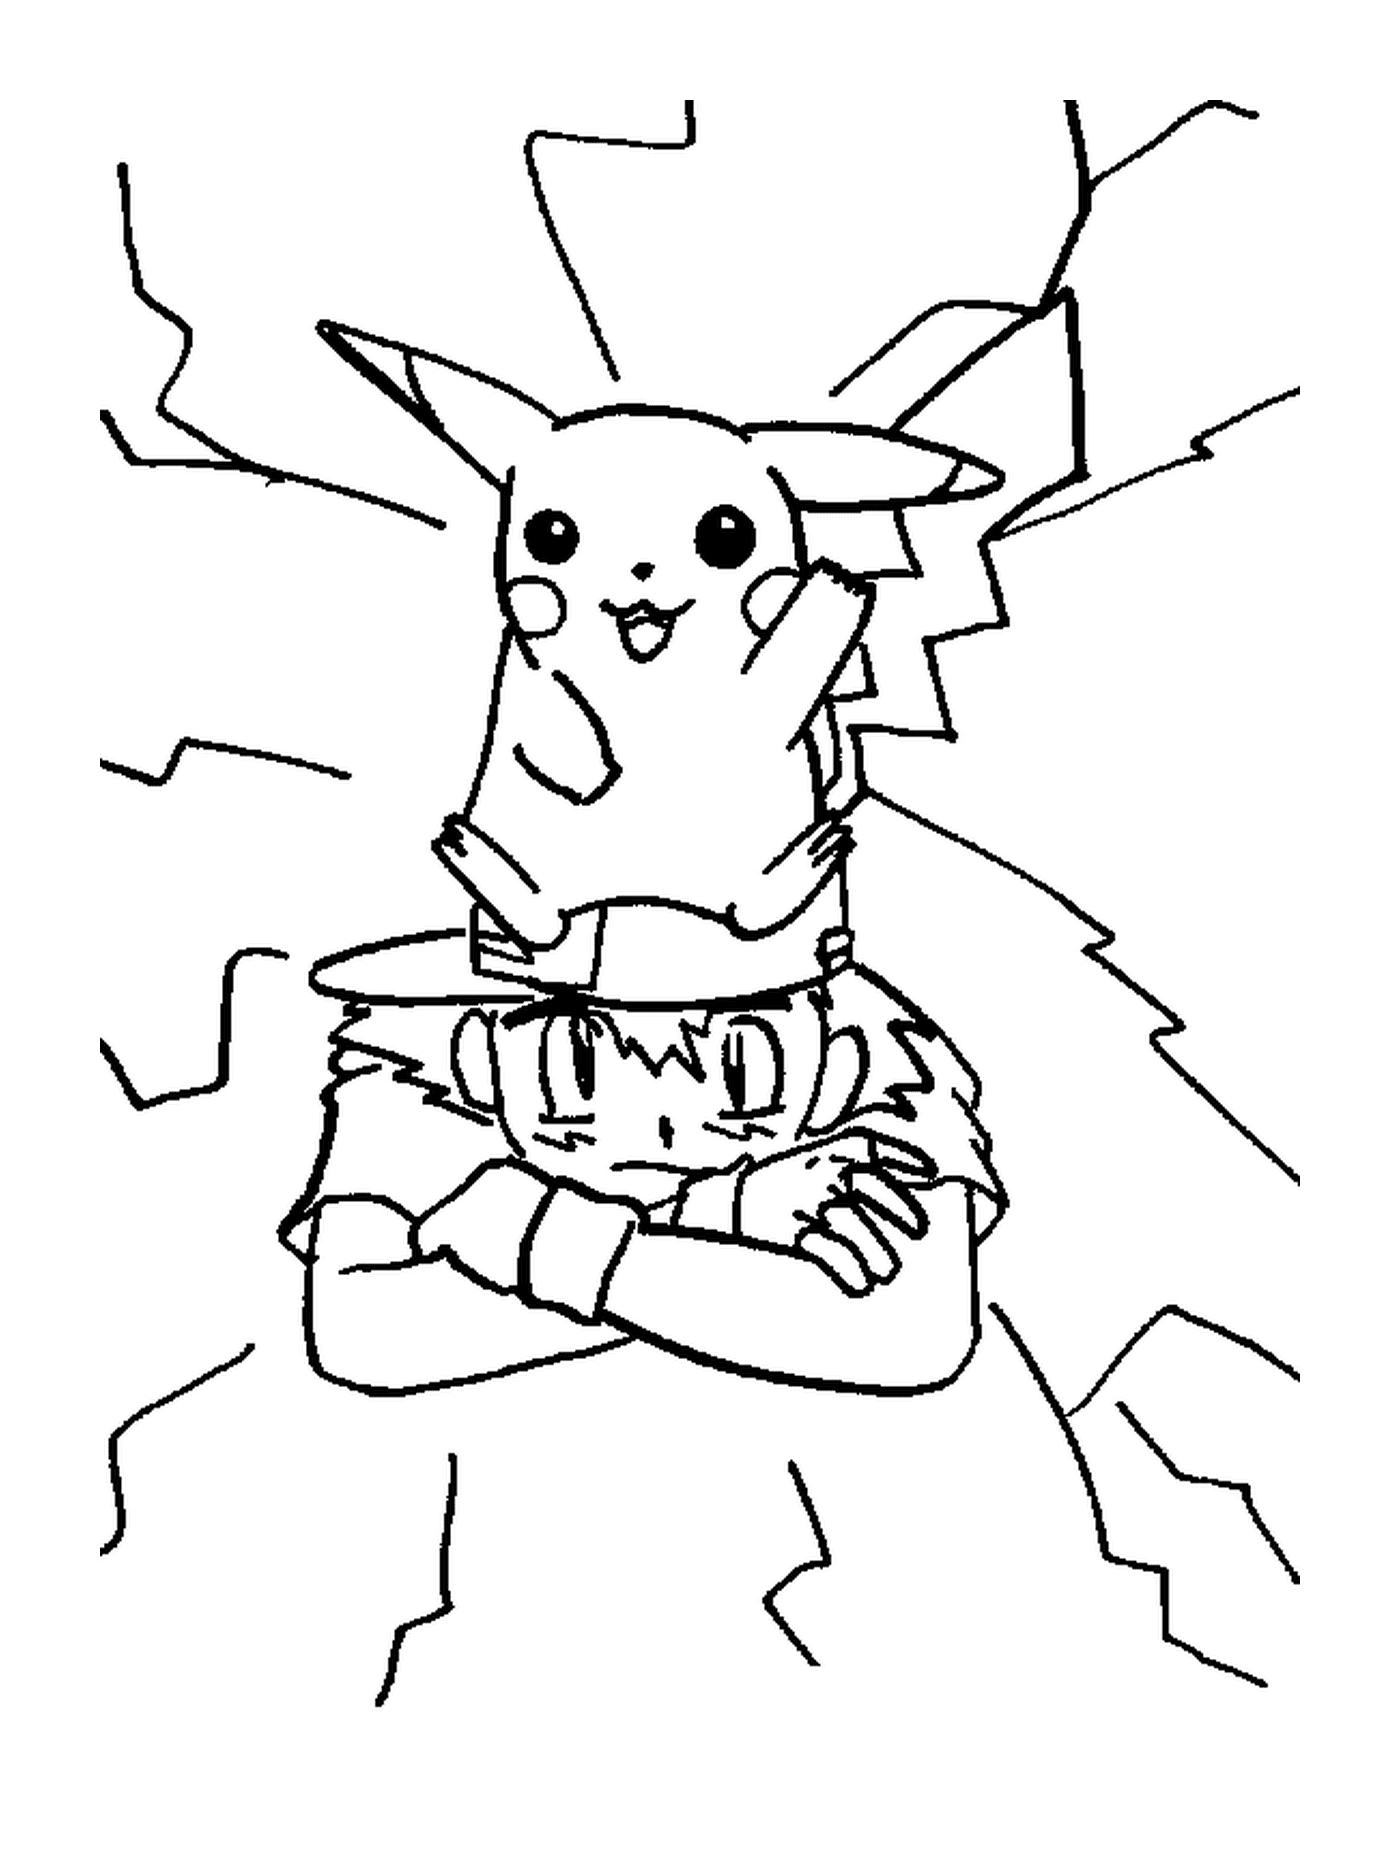  A person with Pikachu on his head 